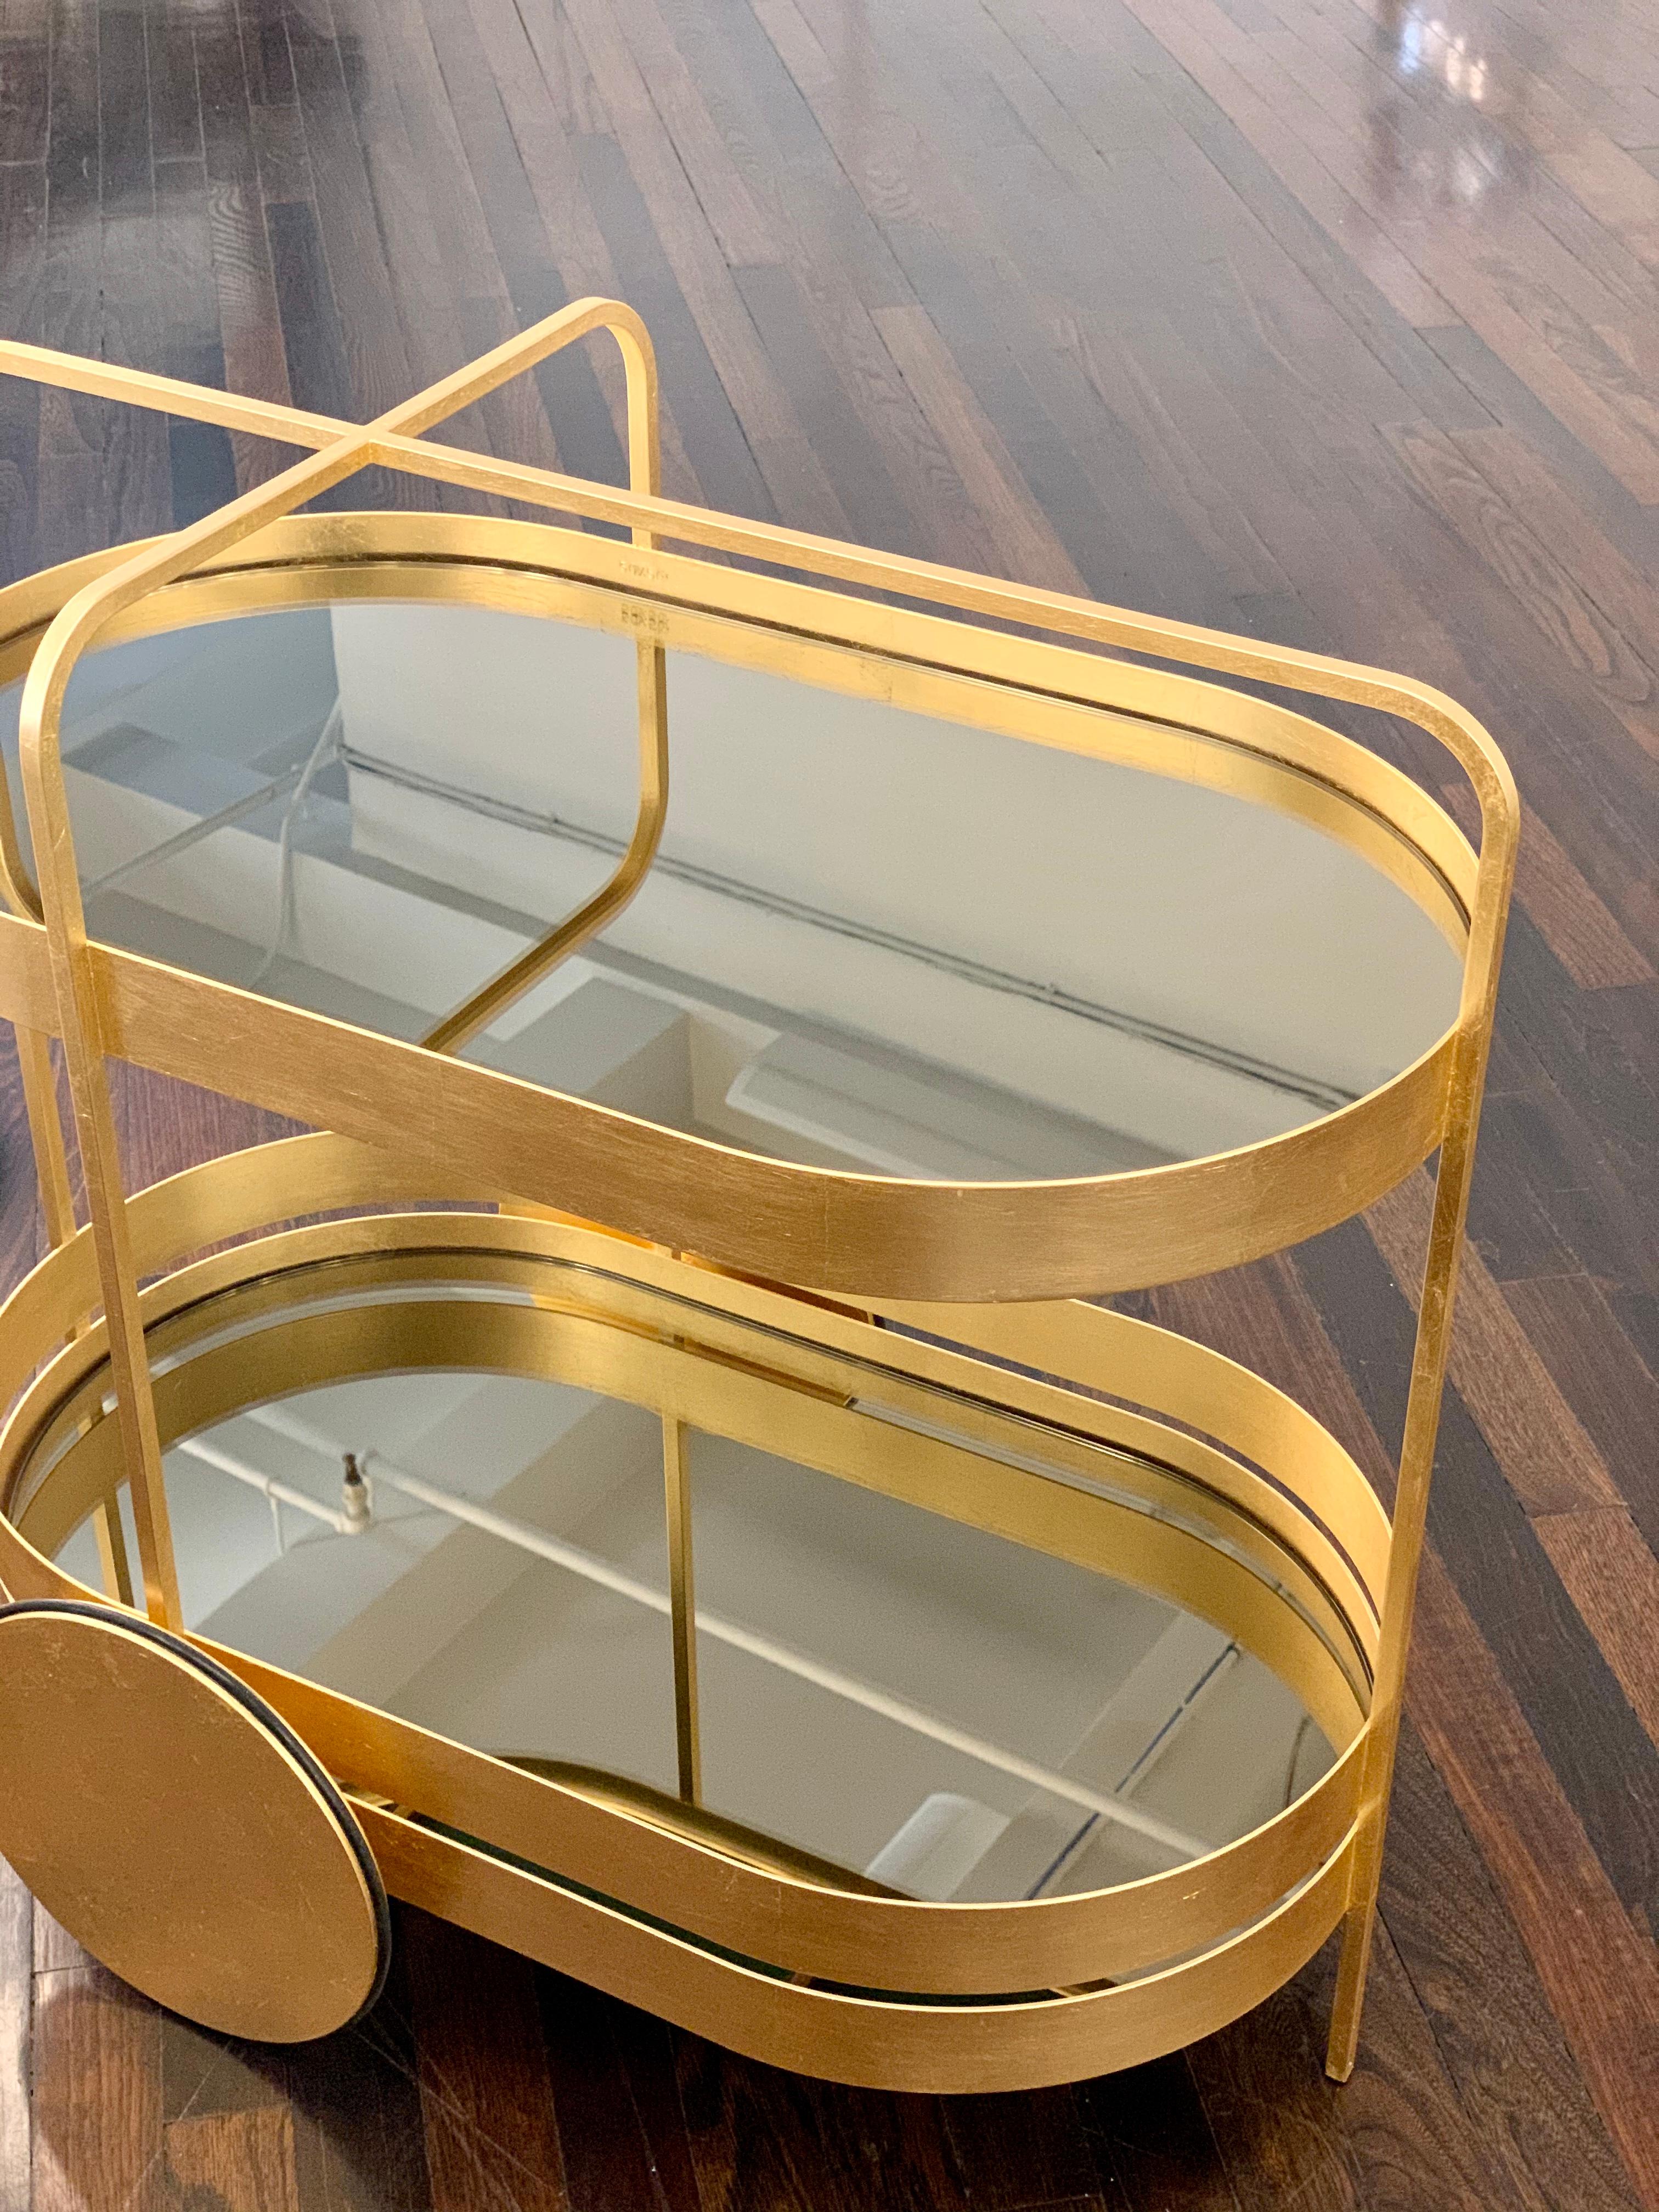 Contemporary Limited Edition 1 of 50 Schonbuch Gold Grace Trolley by Sebastian Herkner